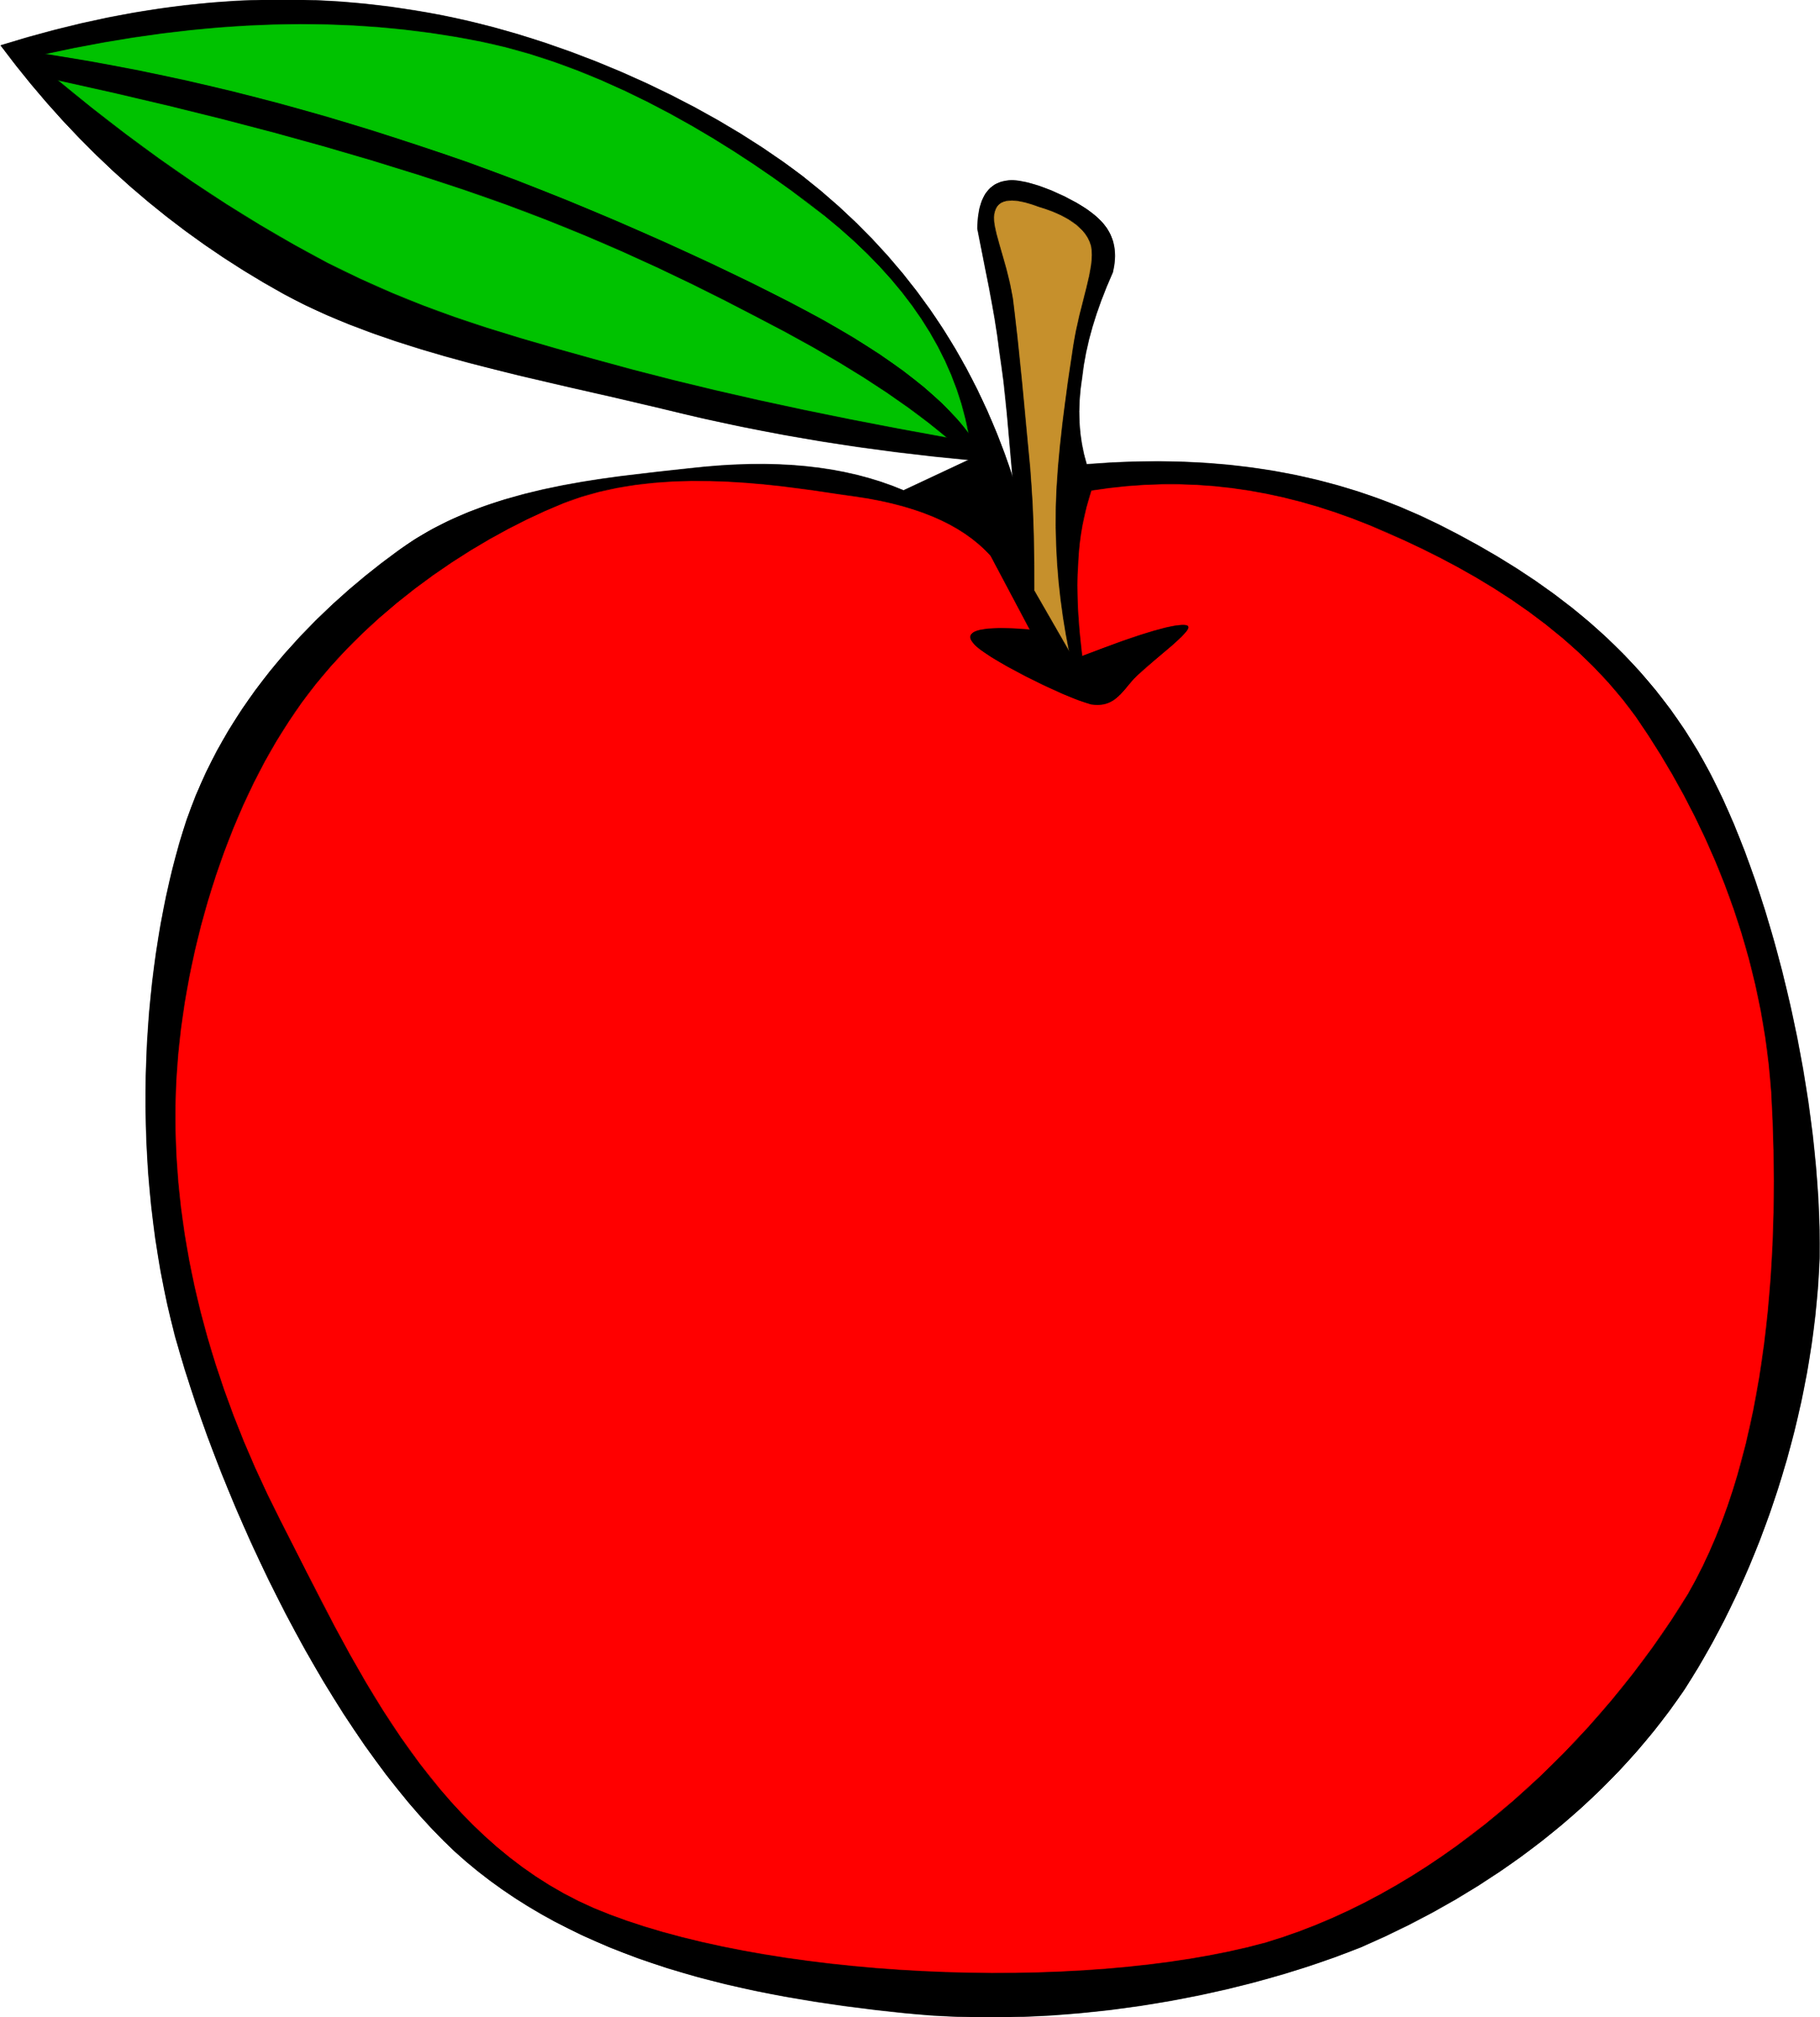 Apple coloring pages printable. Fruits clipart colored